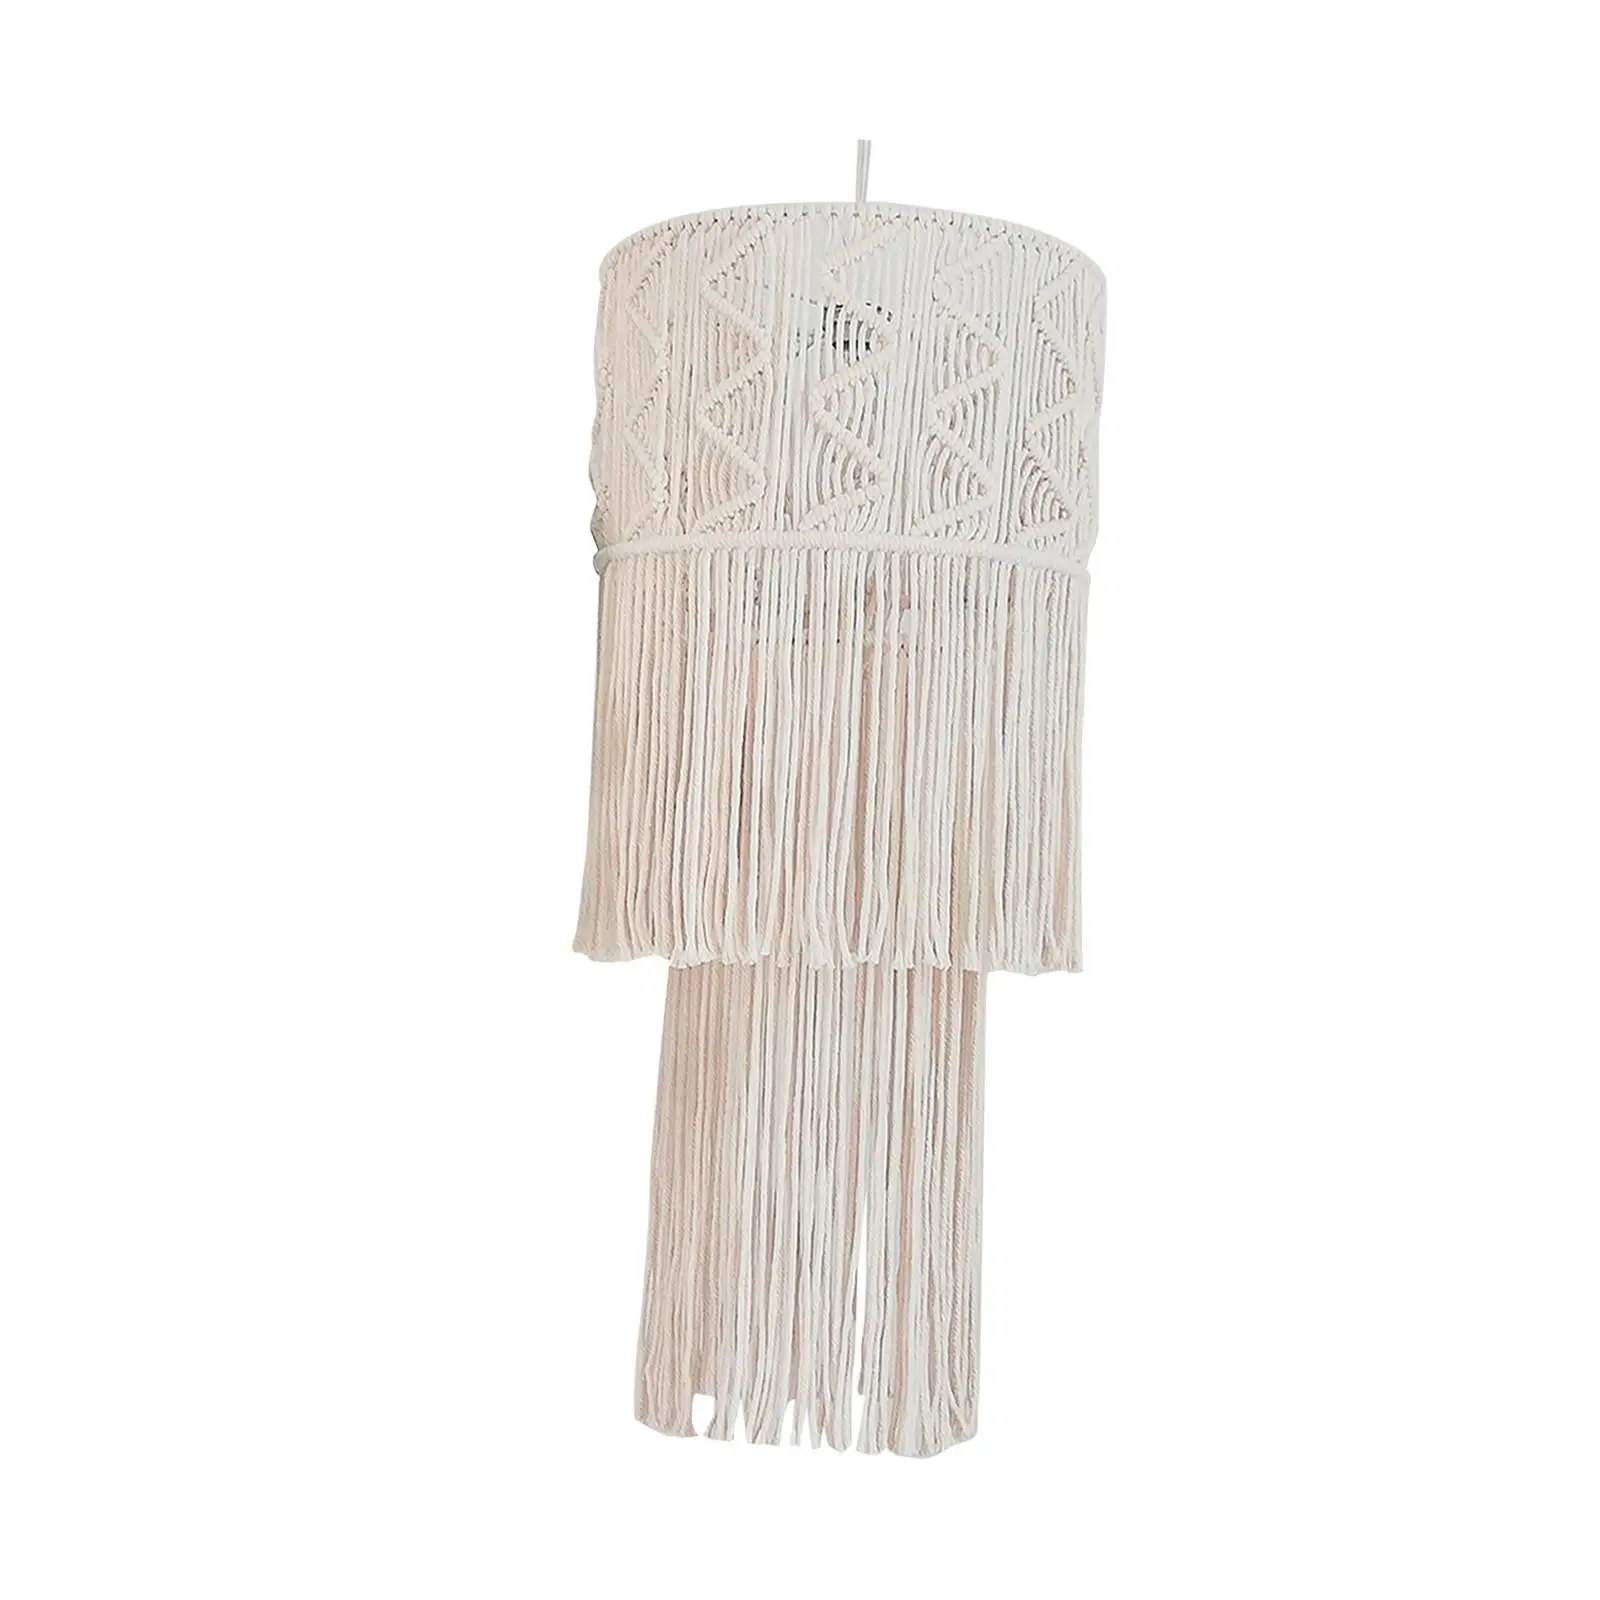 Macrame Lamp Shade Light Cover Boho Hanging Lamp Decoration Light Shade Only Tassel Lampshade for Party Home Wedding Decor